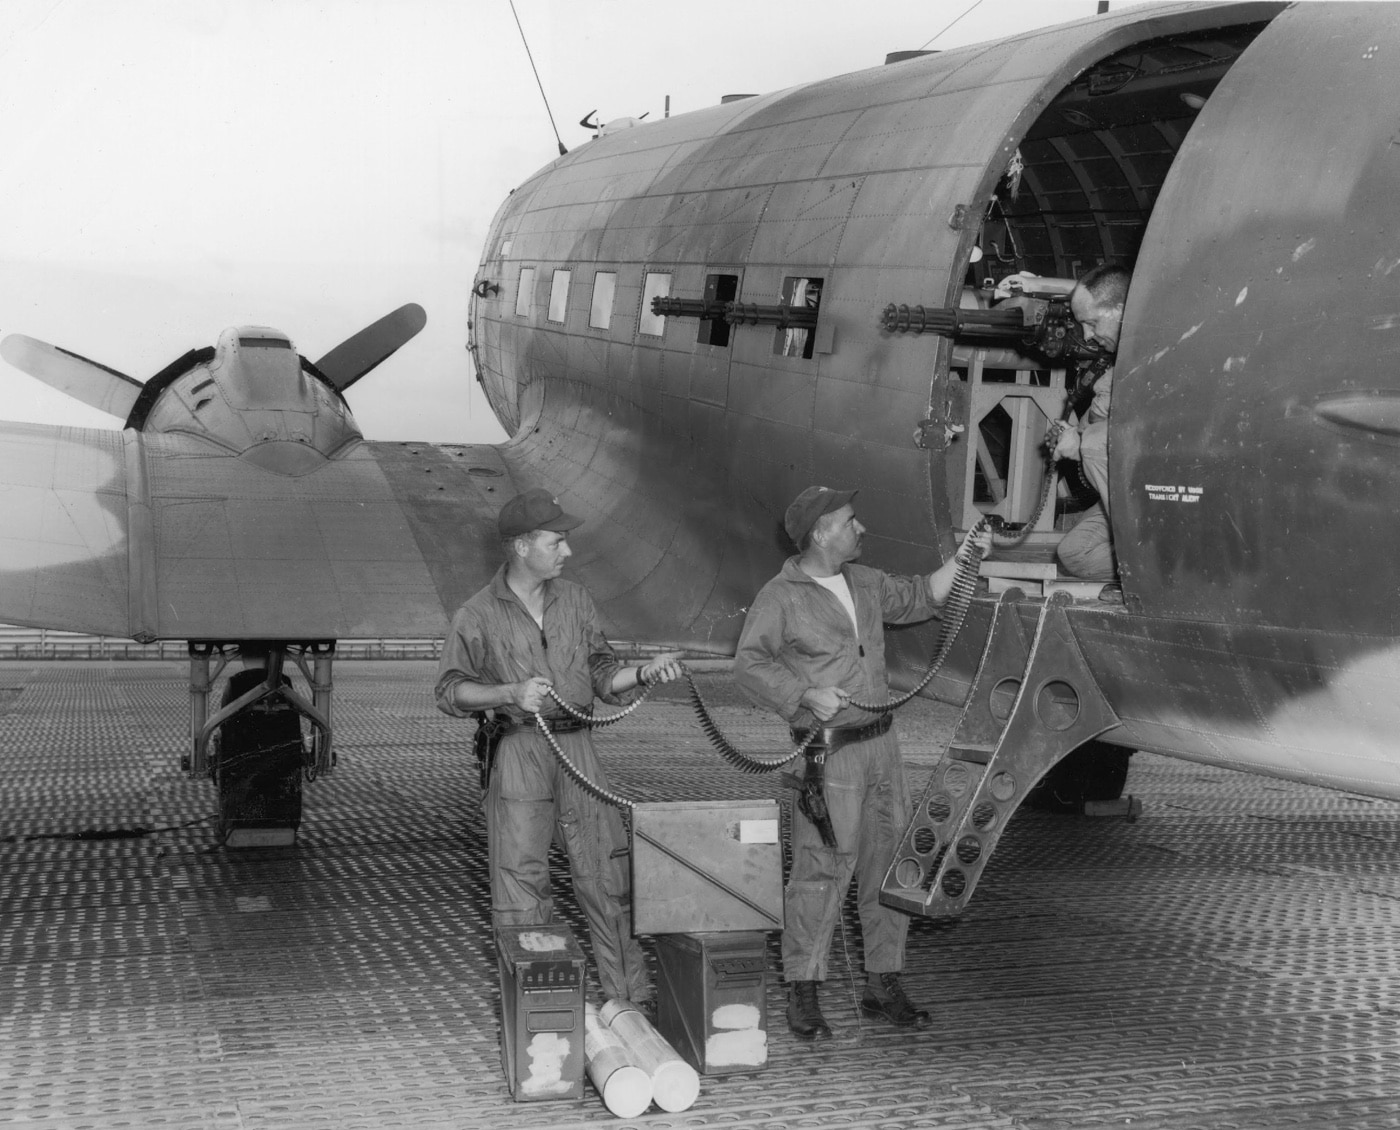 In this photo, we see three Air Force crewmen loading belts of 7.62x51 NATO ammunition into the M134 Miniguns of an AC-47 gunship. Called the AC-47, it was the first fixed-wing aircraft set up as a gunship as part of an Air Force mission to provide close air support to troops in contact throughout South Vietnam. The Air Force used a total of five aircraft to form the first gunship squadron. As new aircraft came onto Nha Trang Air Base, they were folded into the squadron. 